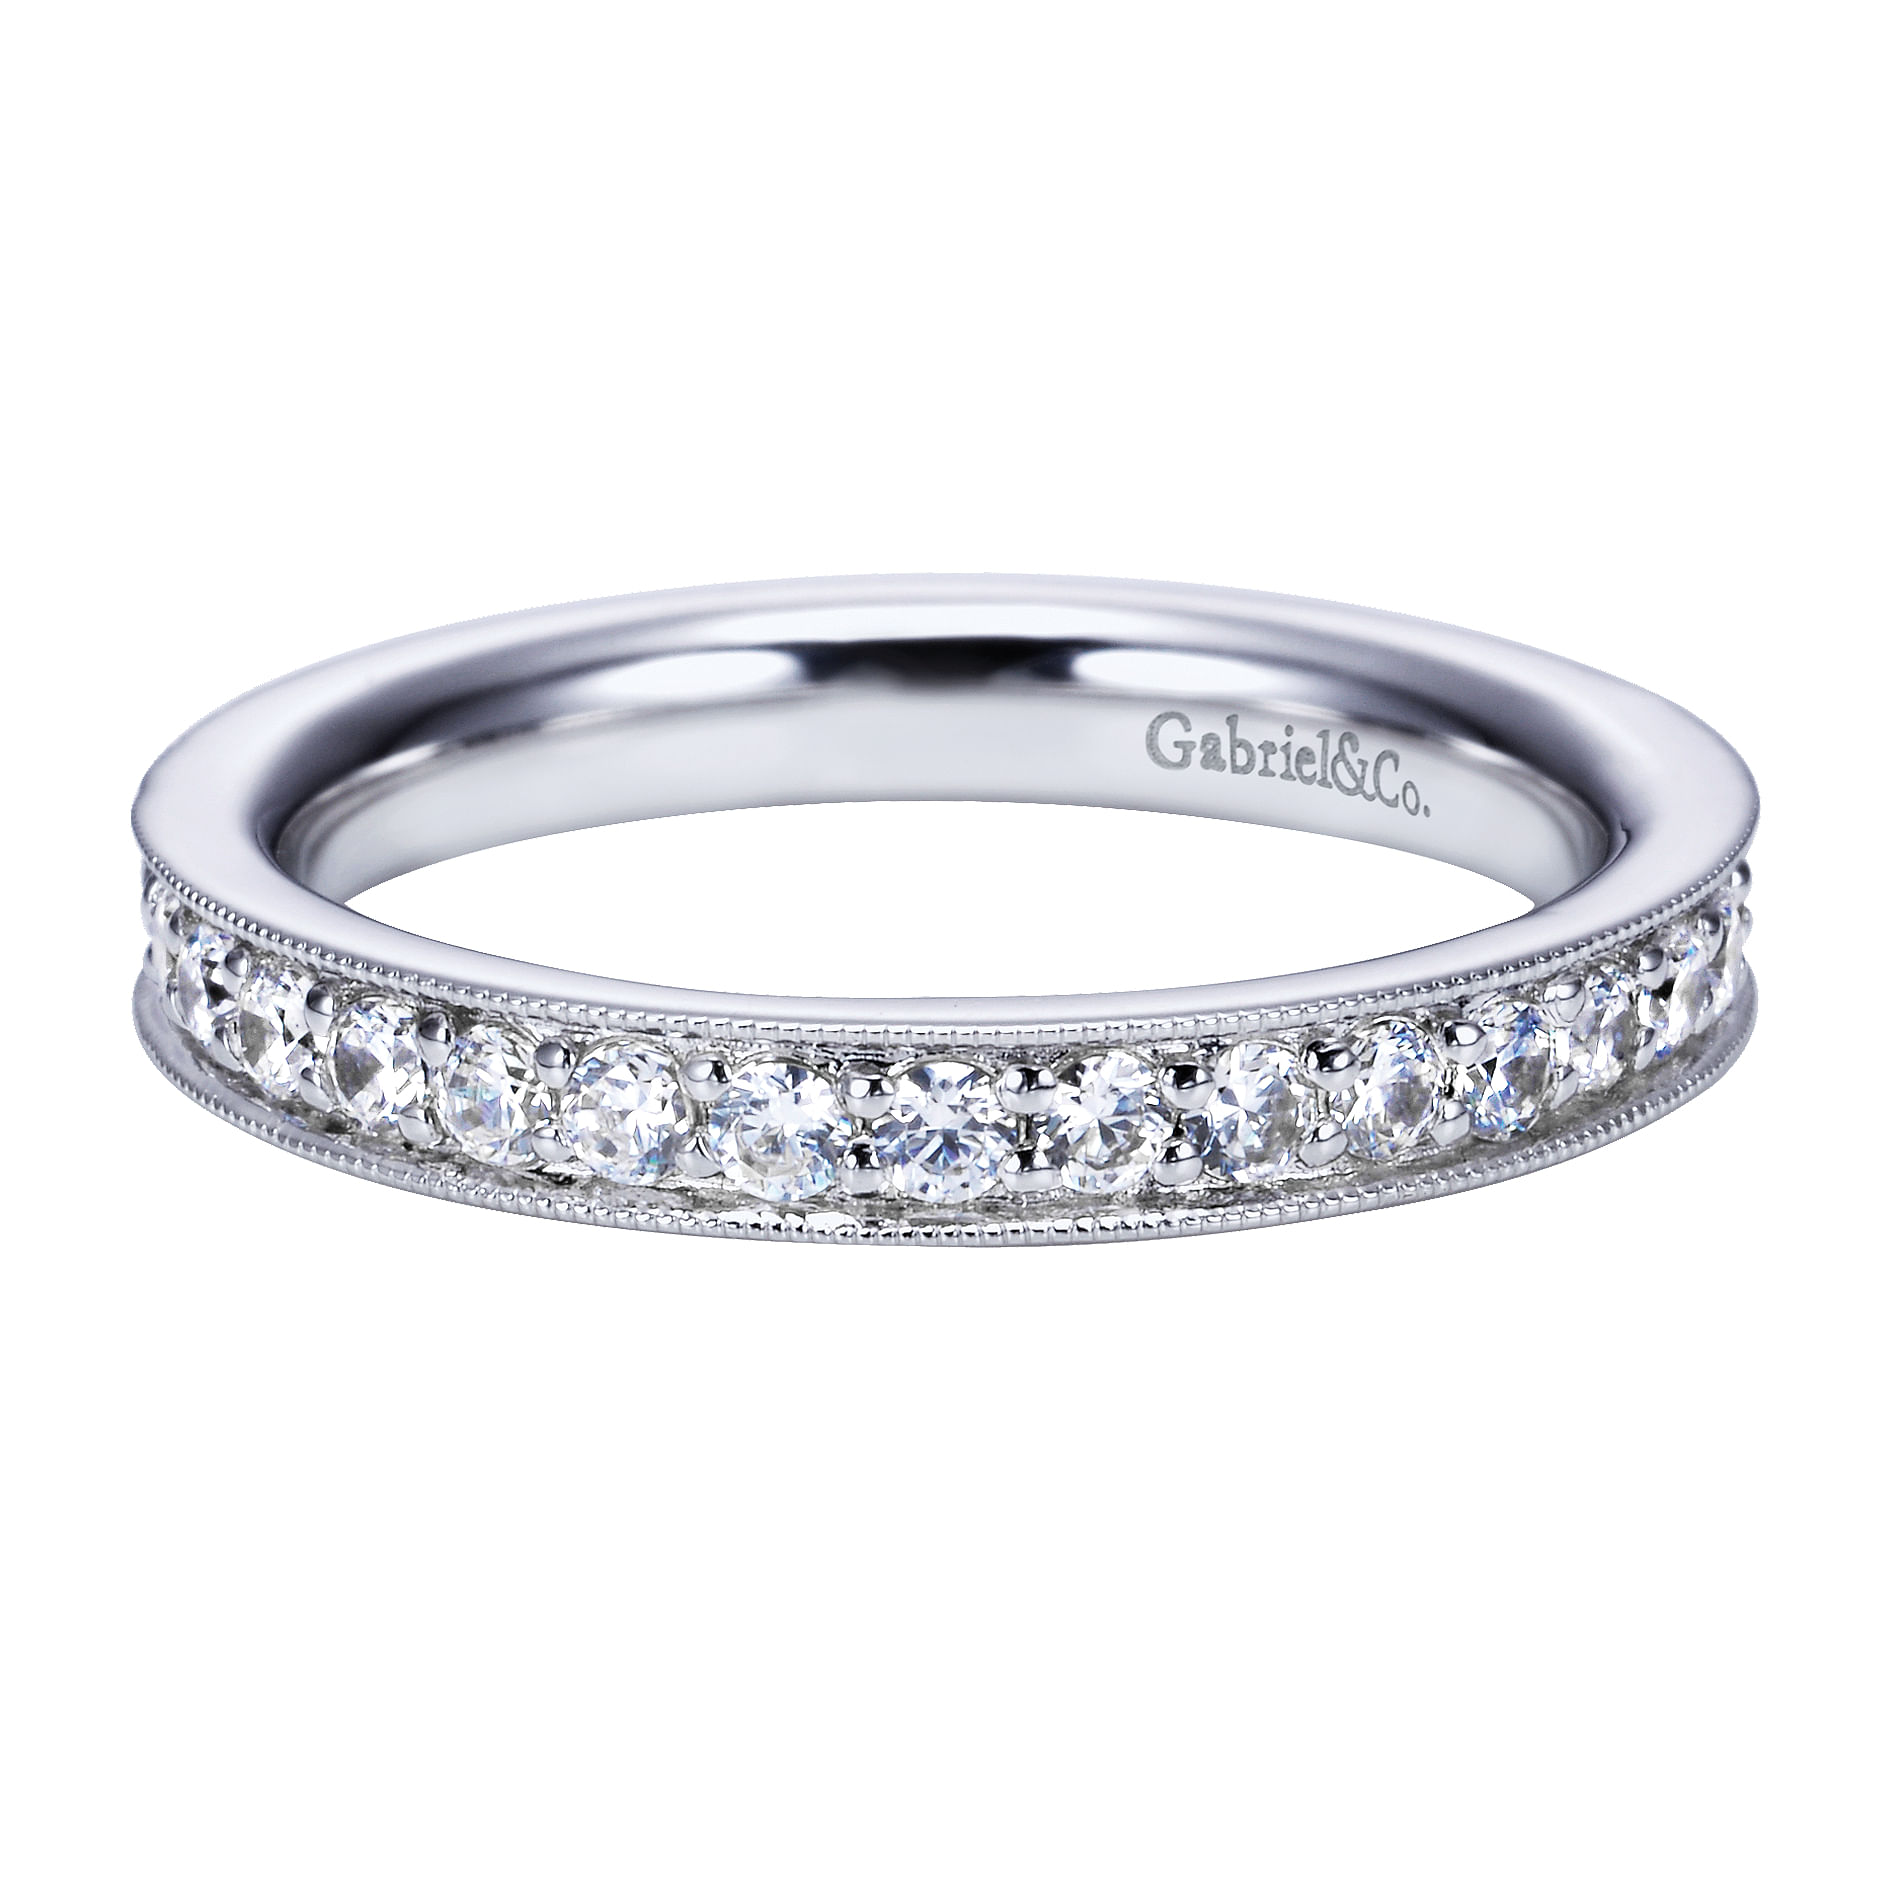 14K White Gold Channel Prong Diamond Eternity Band with Millgrain